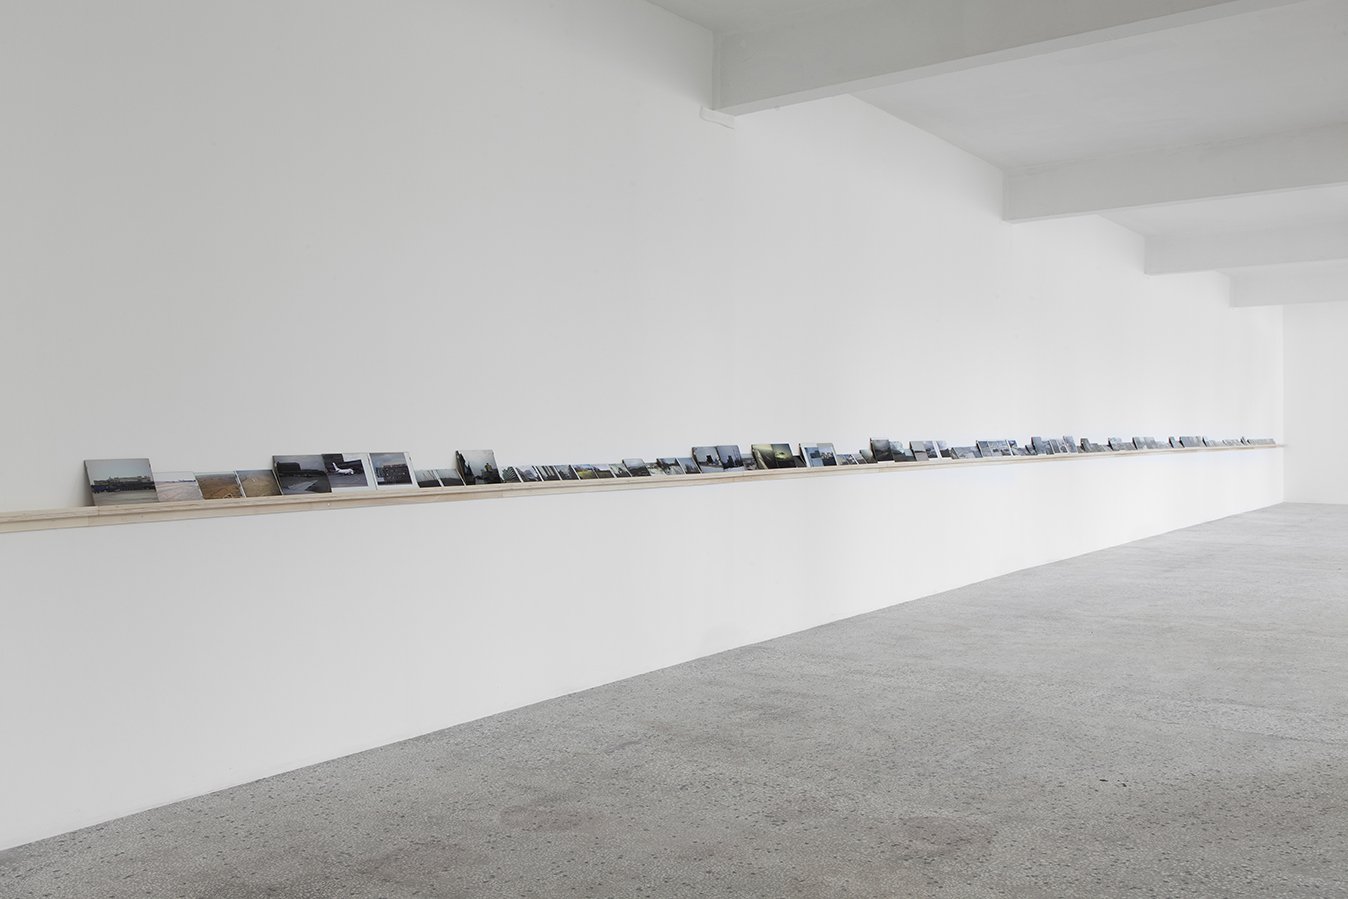 Vangelis Vlahos, Is There Any Oversight On Ocalan?, 119 photographs (framed), dimensions variable: biggest 24 x 30 cm (9 1/2 x 11 3/4 in) smallest 10 x 15 cm (4 x 5 7/8 in) on a wall mounted shelf 23 m long (905 1/2 in), 2009 – 2011